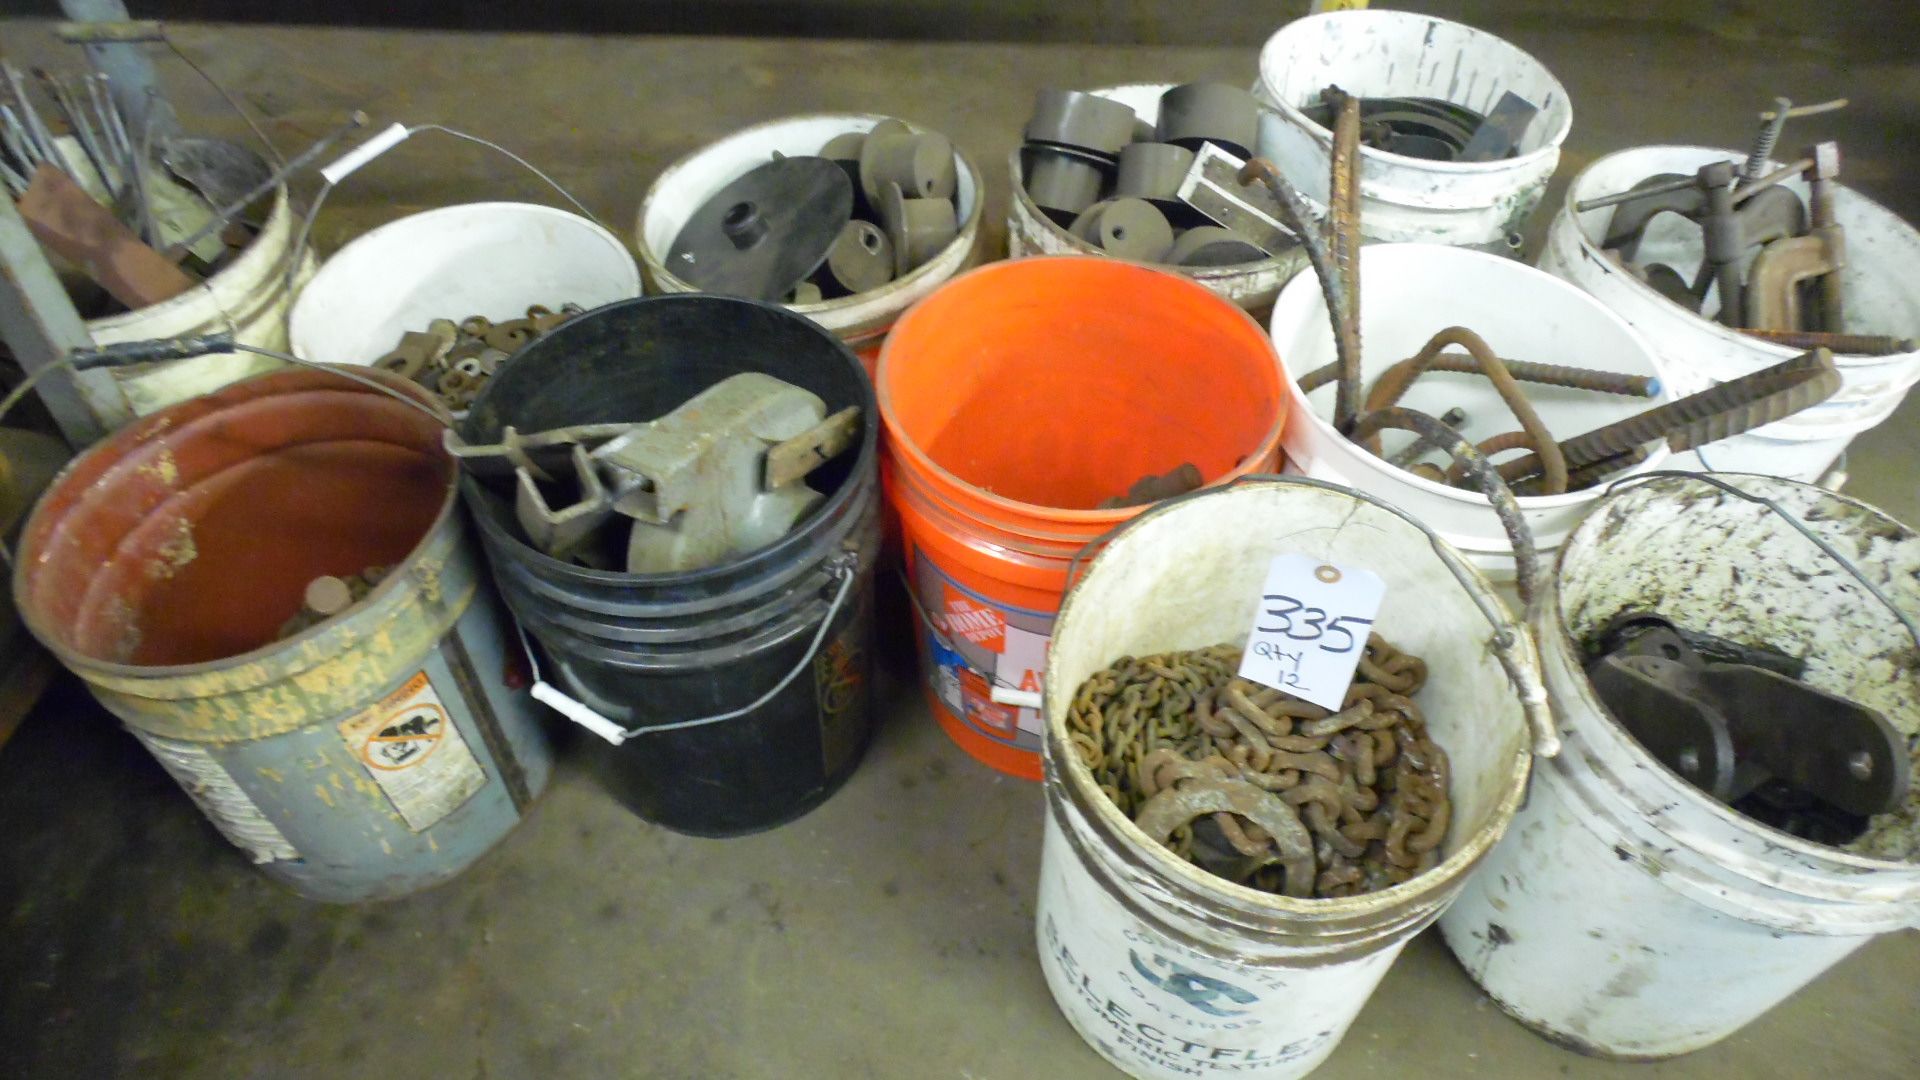 12 BUCKETS MISC. METAL / CHAINS / CLAMPS